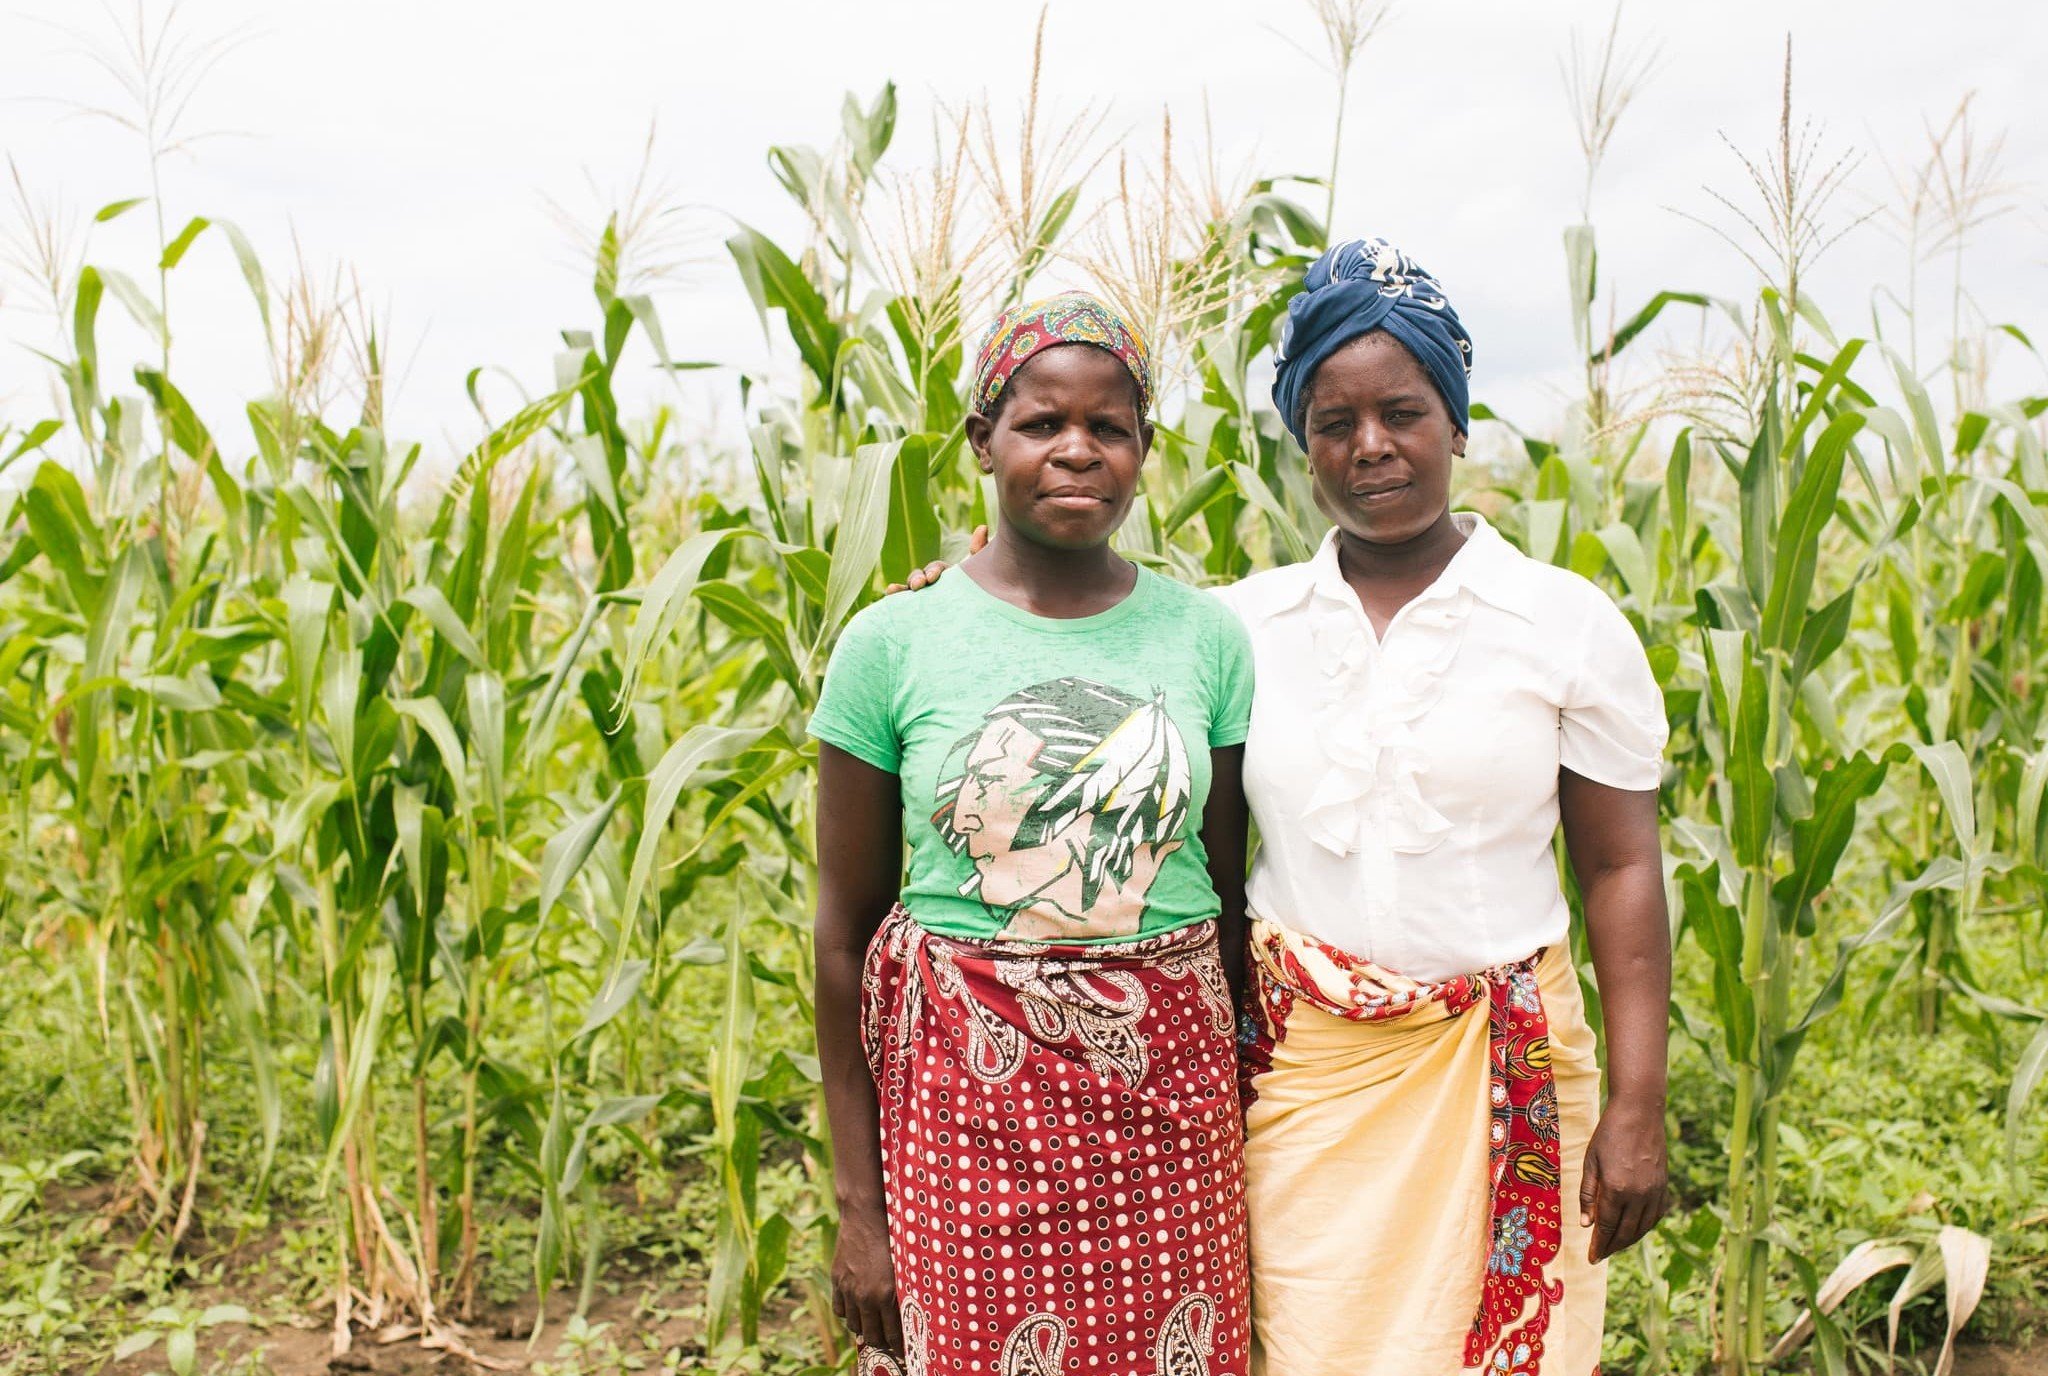 Virginia (left), a farmer and a mother from Josina Machel village in Mozambique, lost everything in the cyclone. She came to Ndedja resettlement site to receive tools and seeds from Oxfam’s partner Kulima. However, the crops she planted in the aftermath of the cyclone were damaged by severe floods again in January this year. (Photo: Elena Heatherwick / Oxfam)